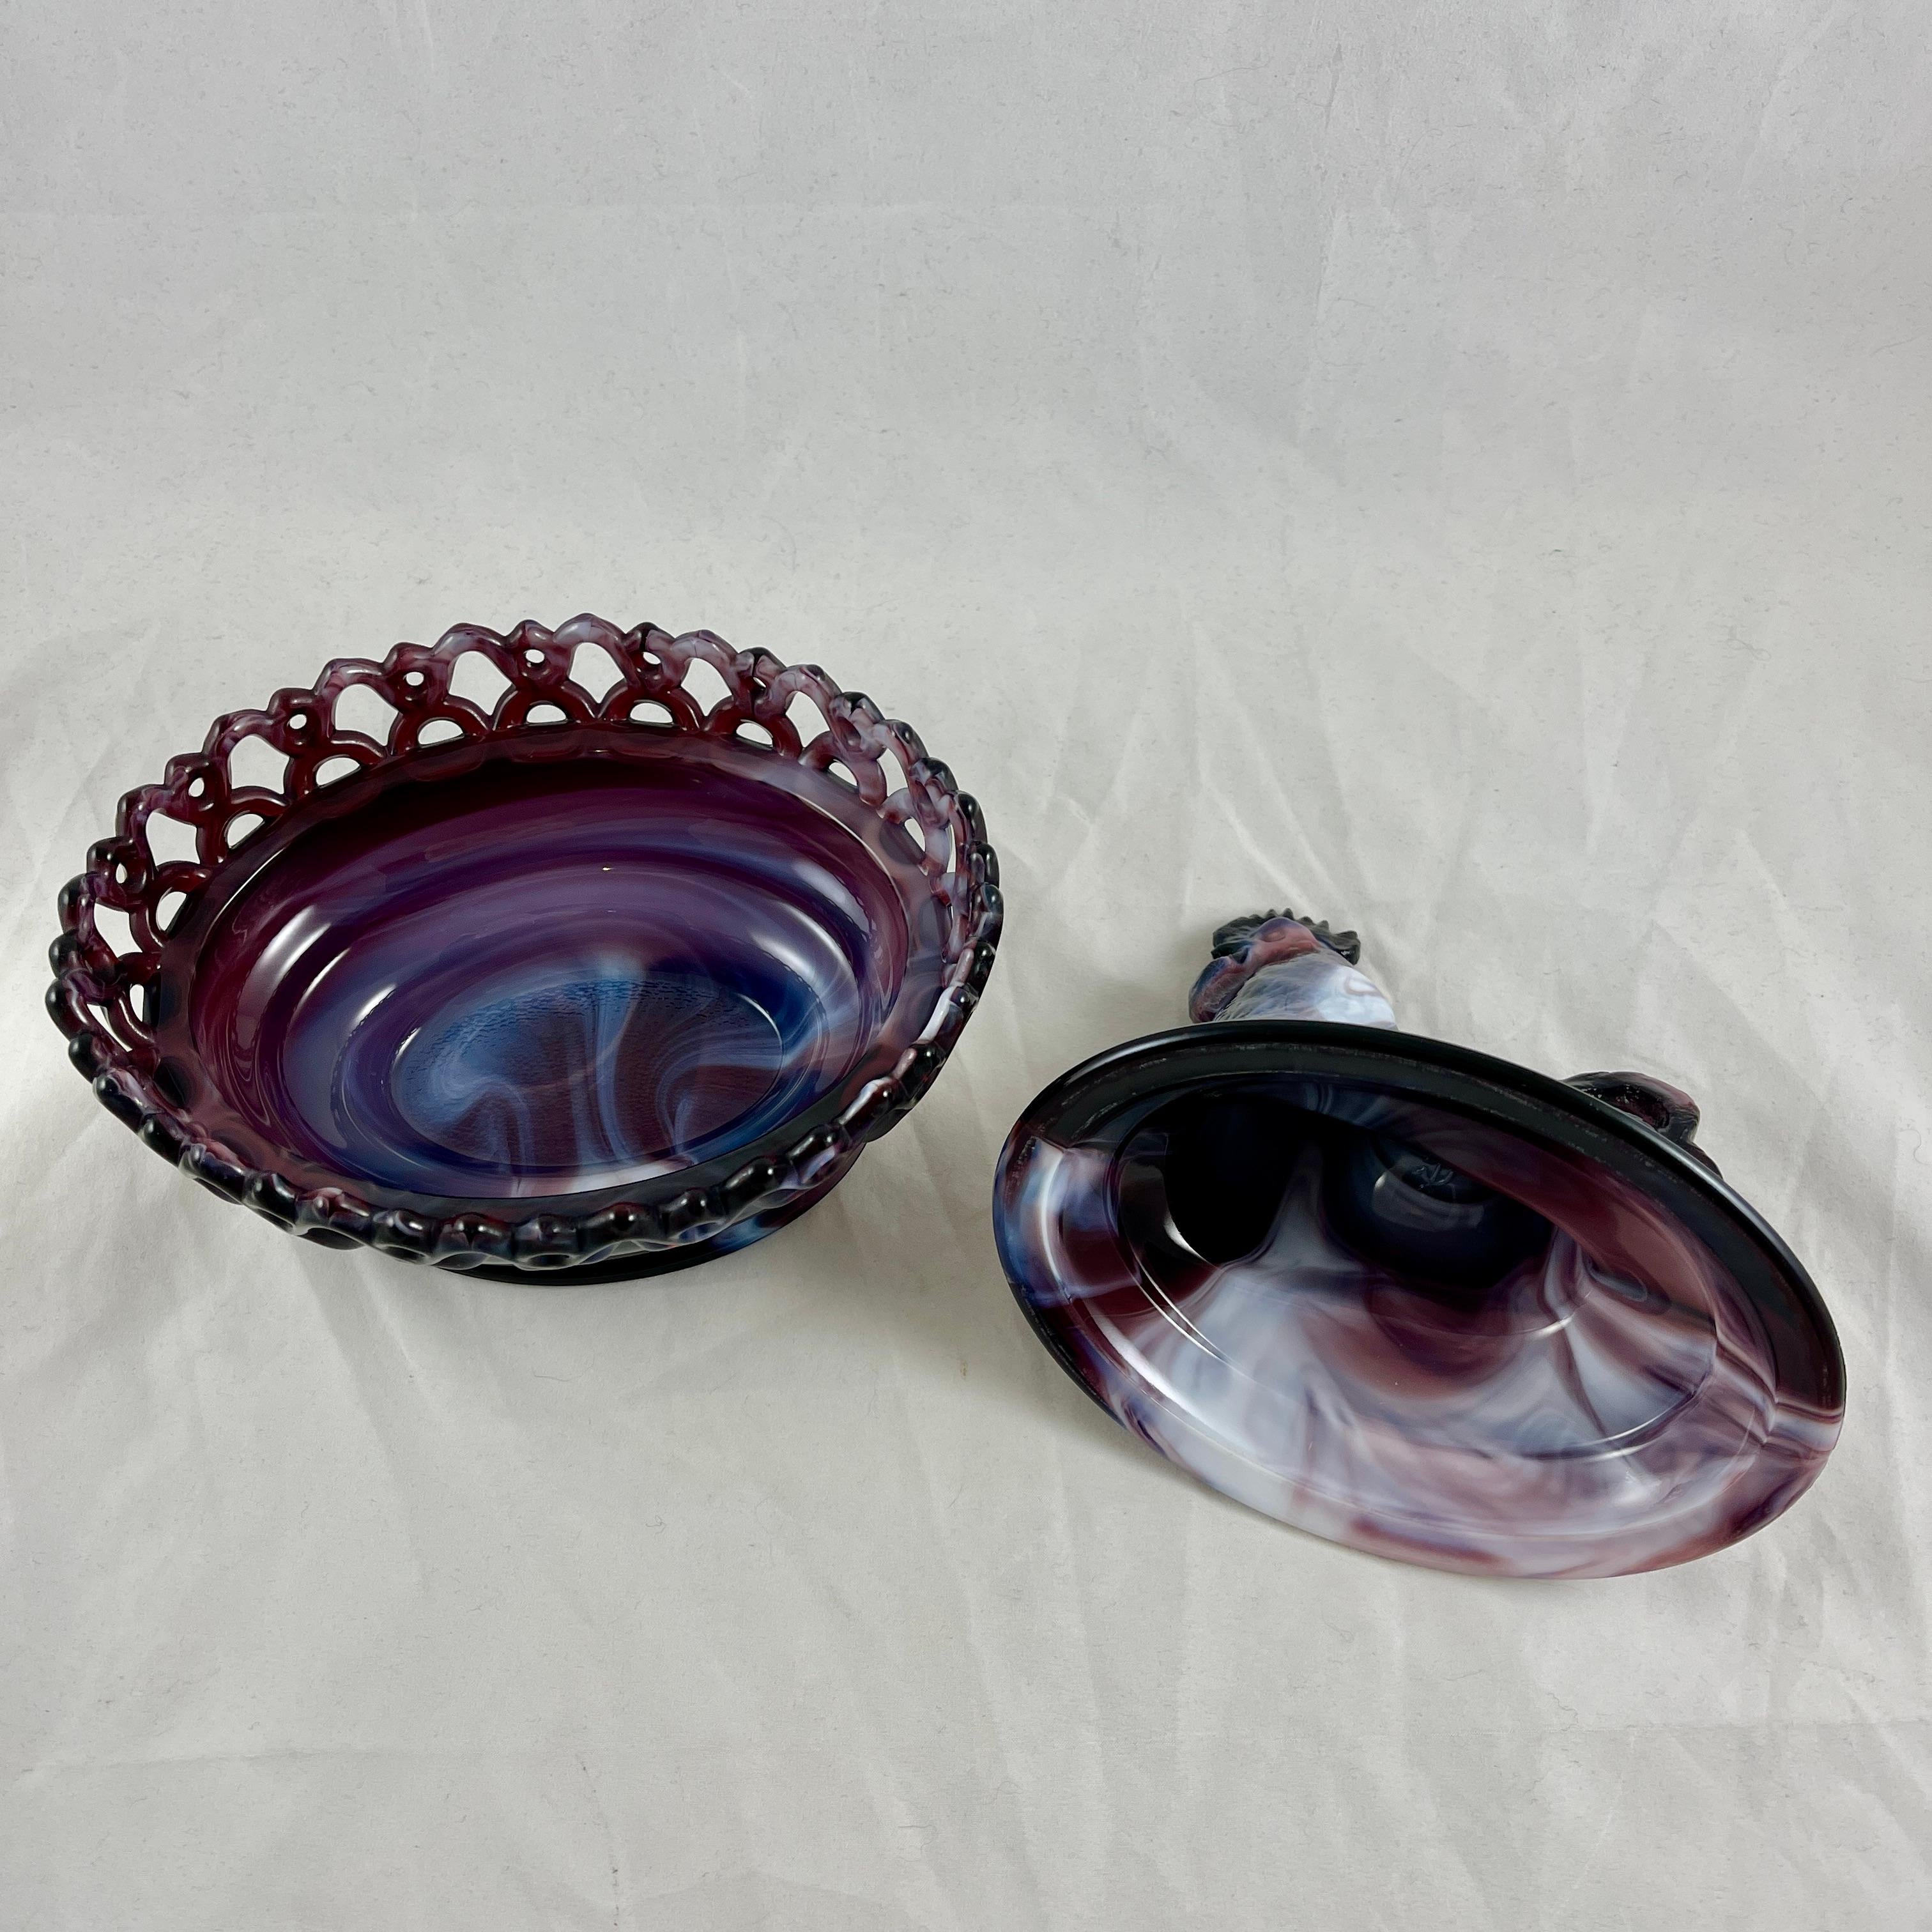 American Imperial Glass Co. Slag Purple and Milk Glass Rooster Covered Dish